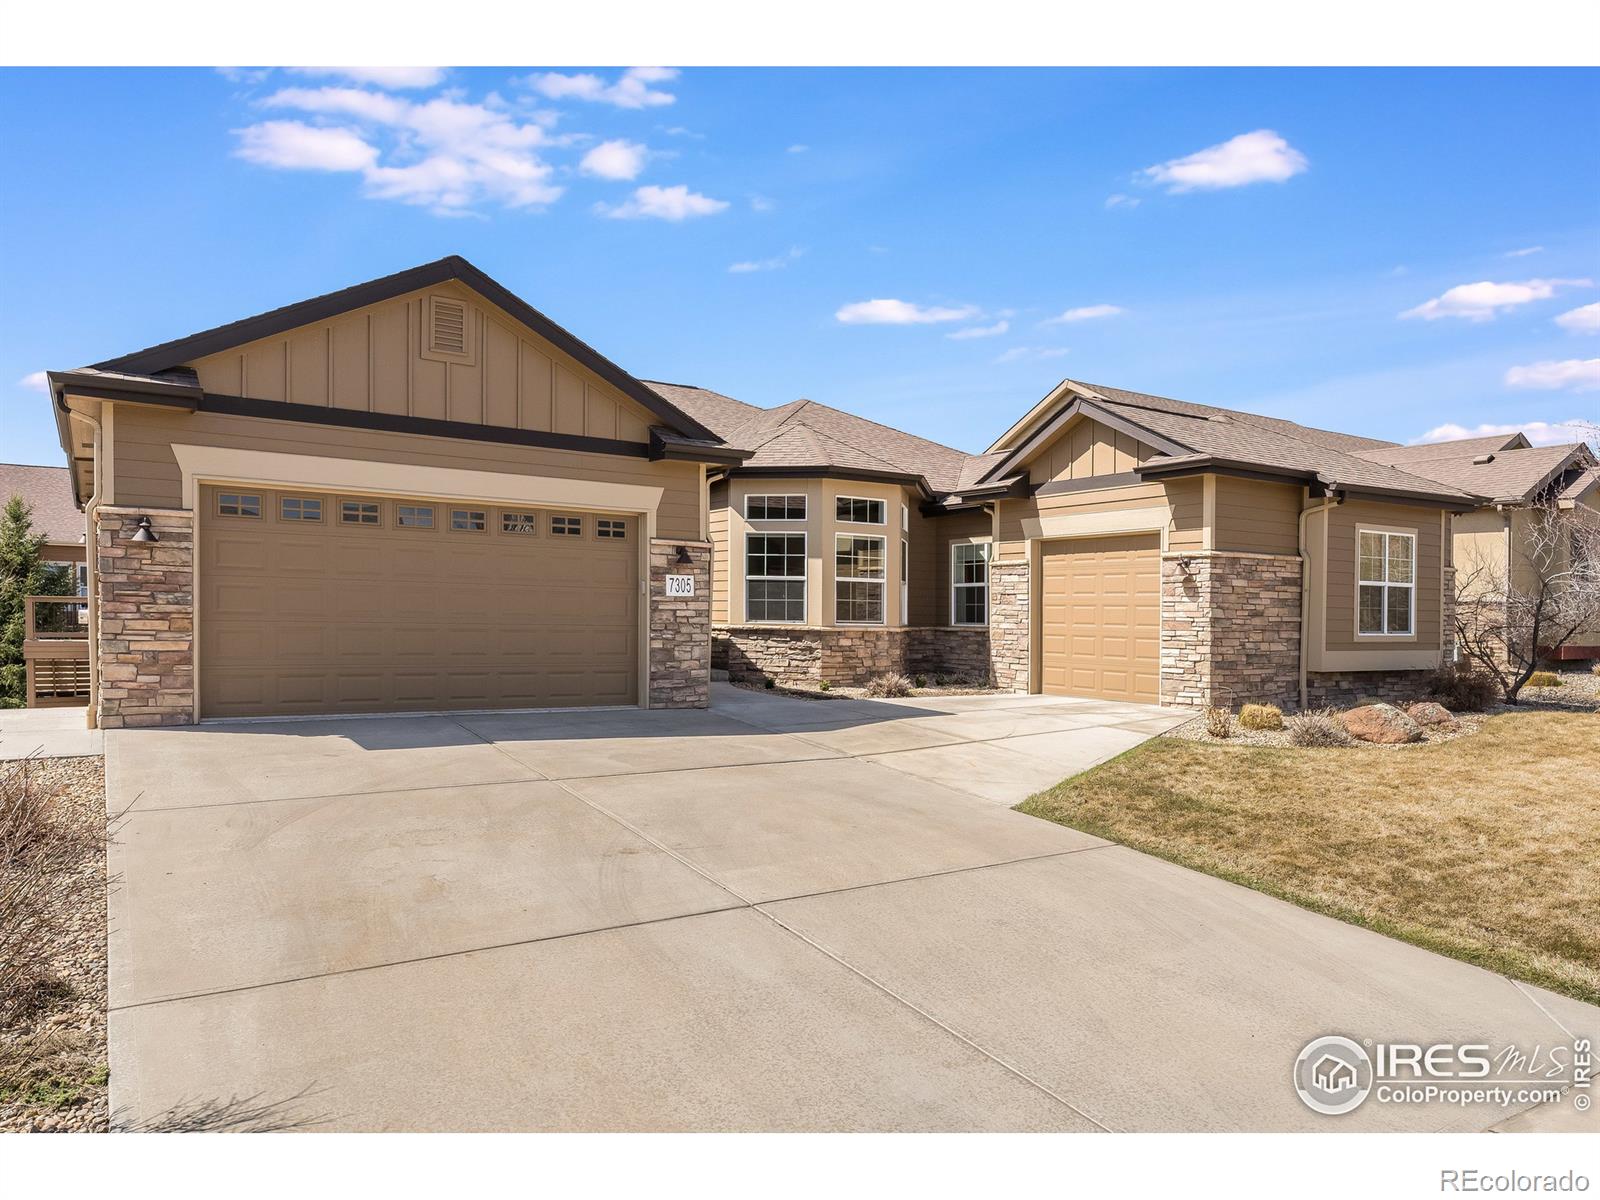 Report Image for 7305  Caledonian Court,Windsor, Colorado